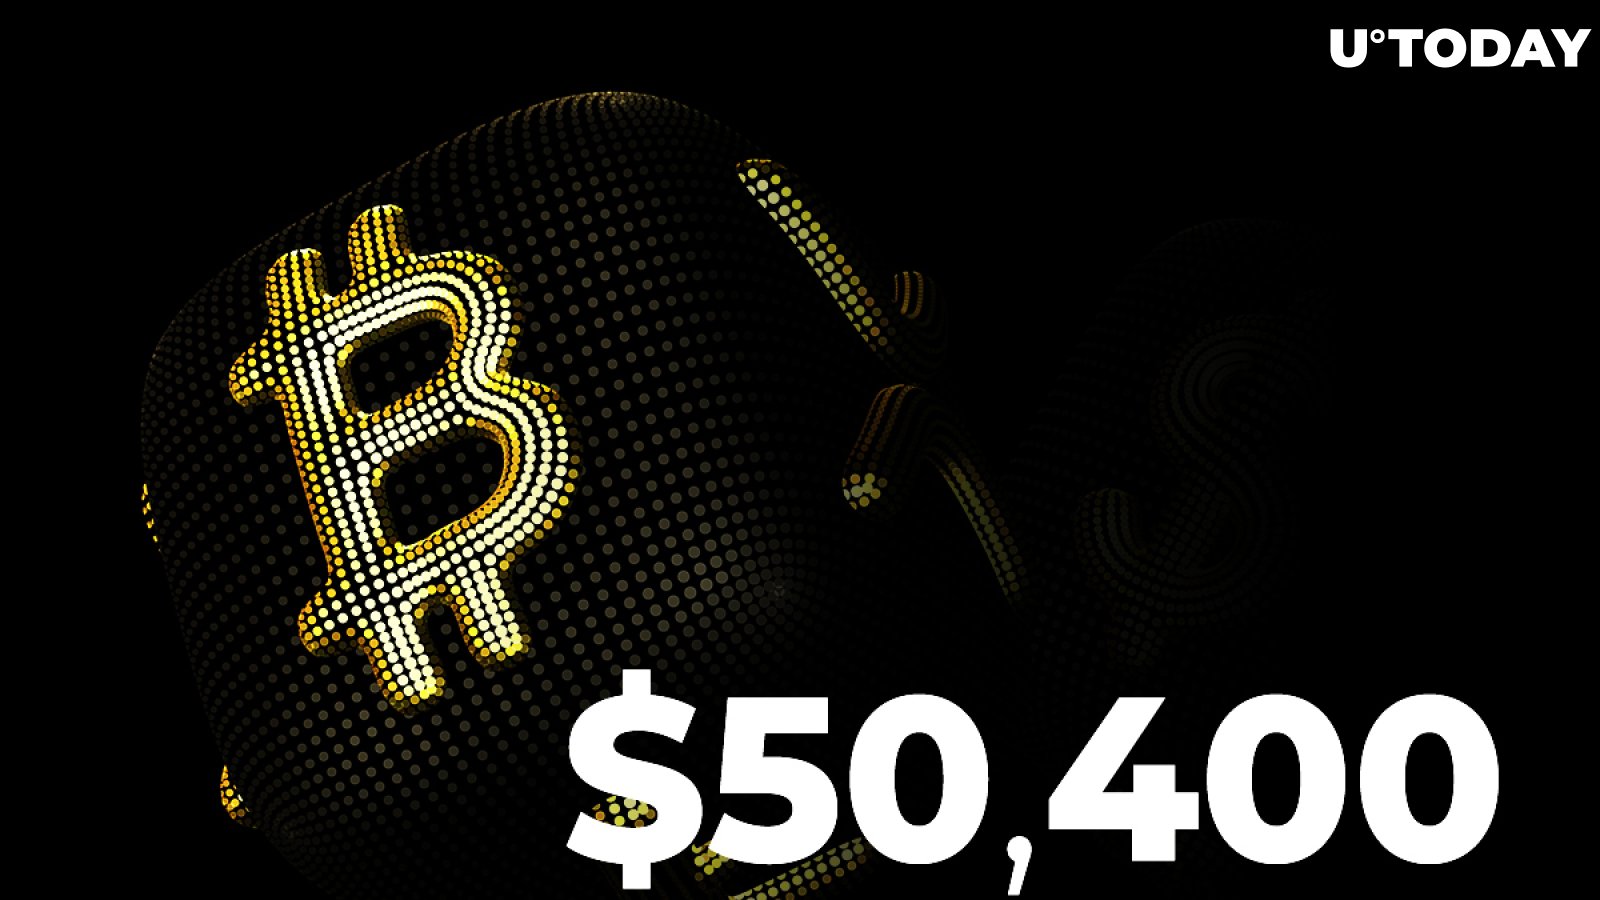 Bitcoin Suddenly Touches $50,400, Adding $1,500